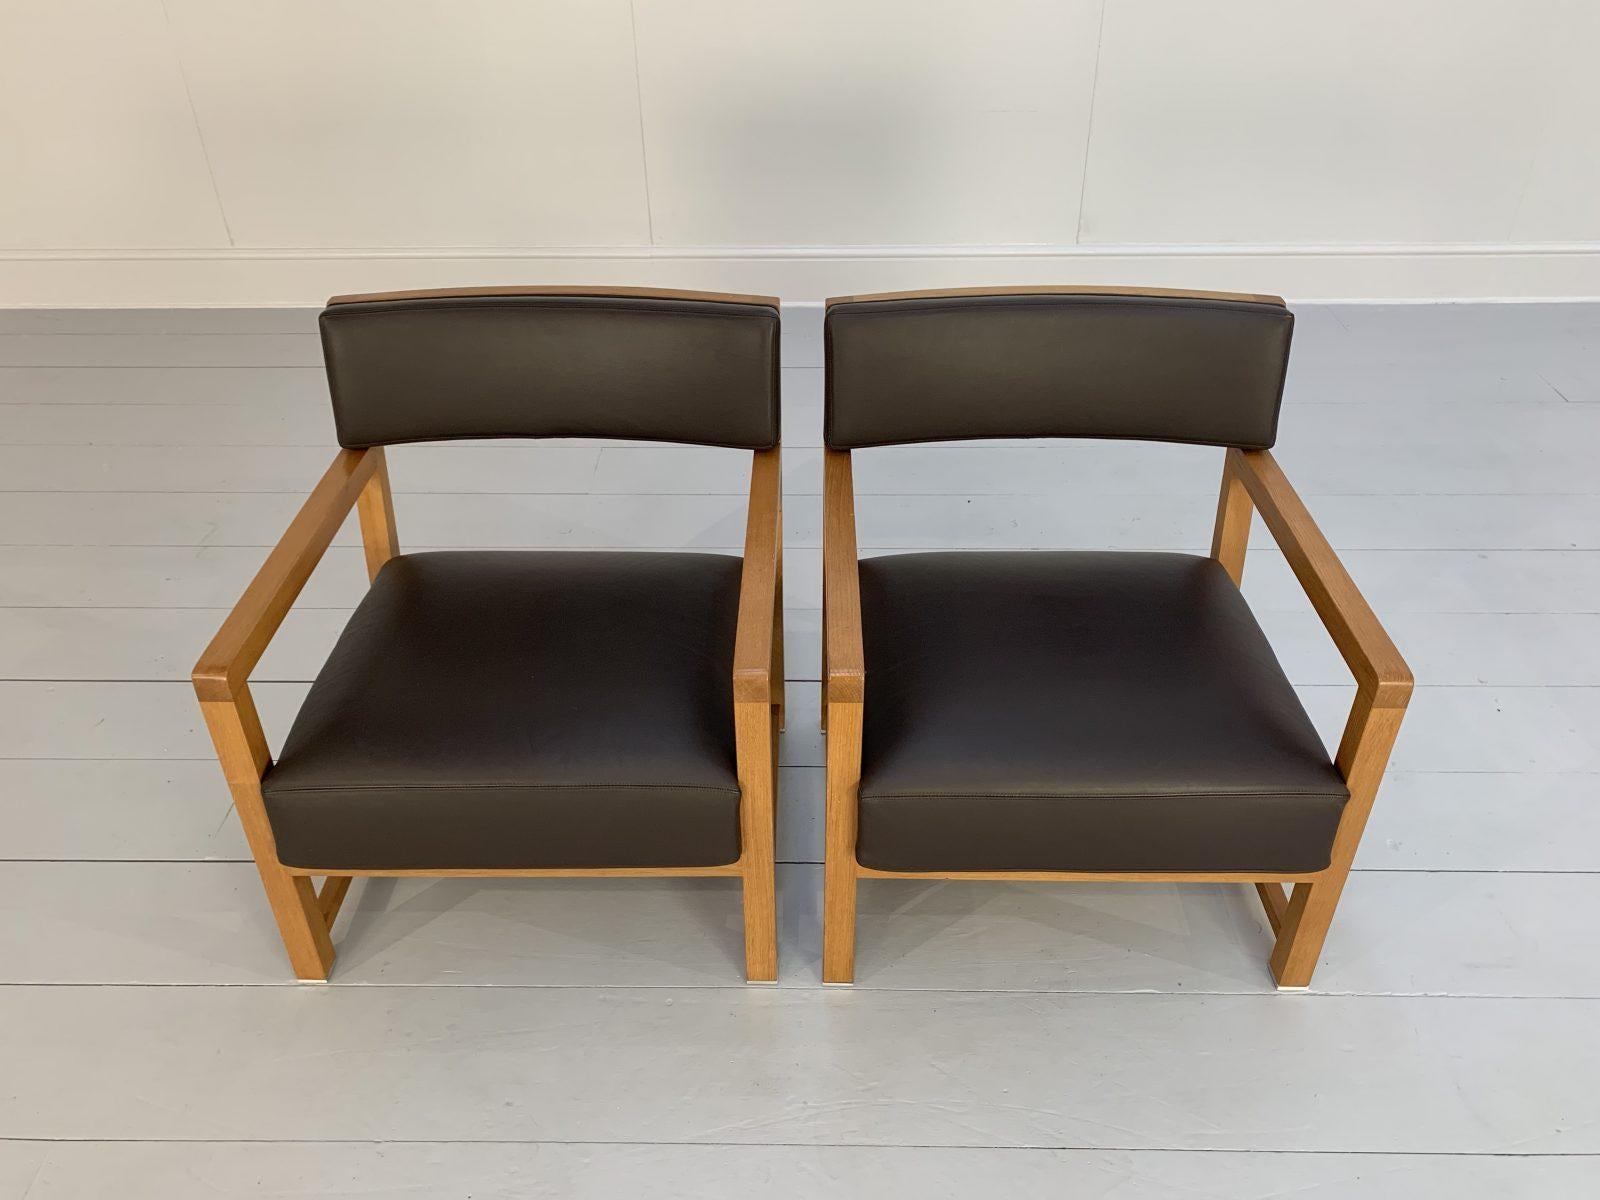 Pair of B&B Italia “Maxalto” Armchairs in “Pelle” Leather and Wood For Sale 1